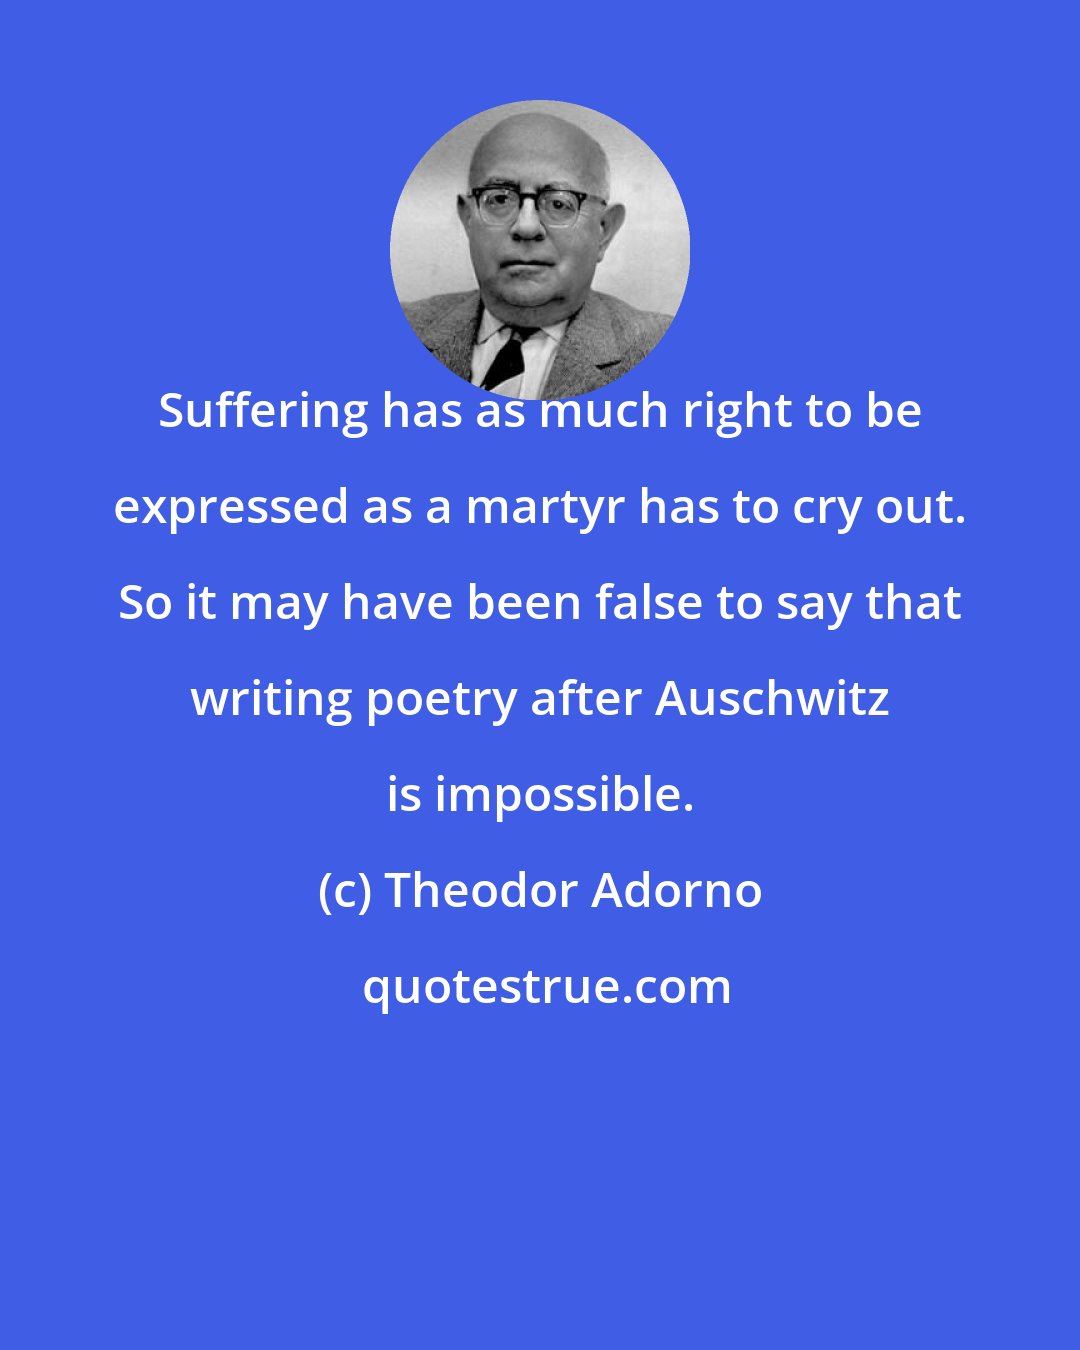 Theodor Adorno: Suffering has as much right to be expressed as a martyr has to cry out. So it may have been false to say that writing poetry after Auschwitz is impossible.